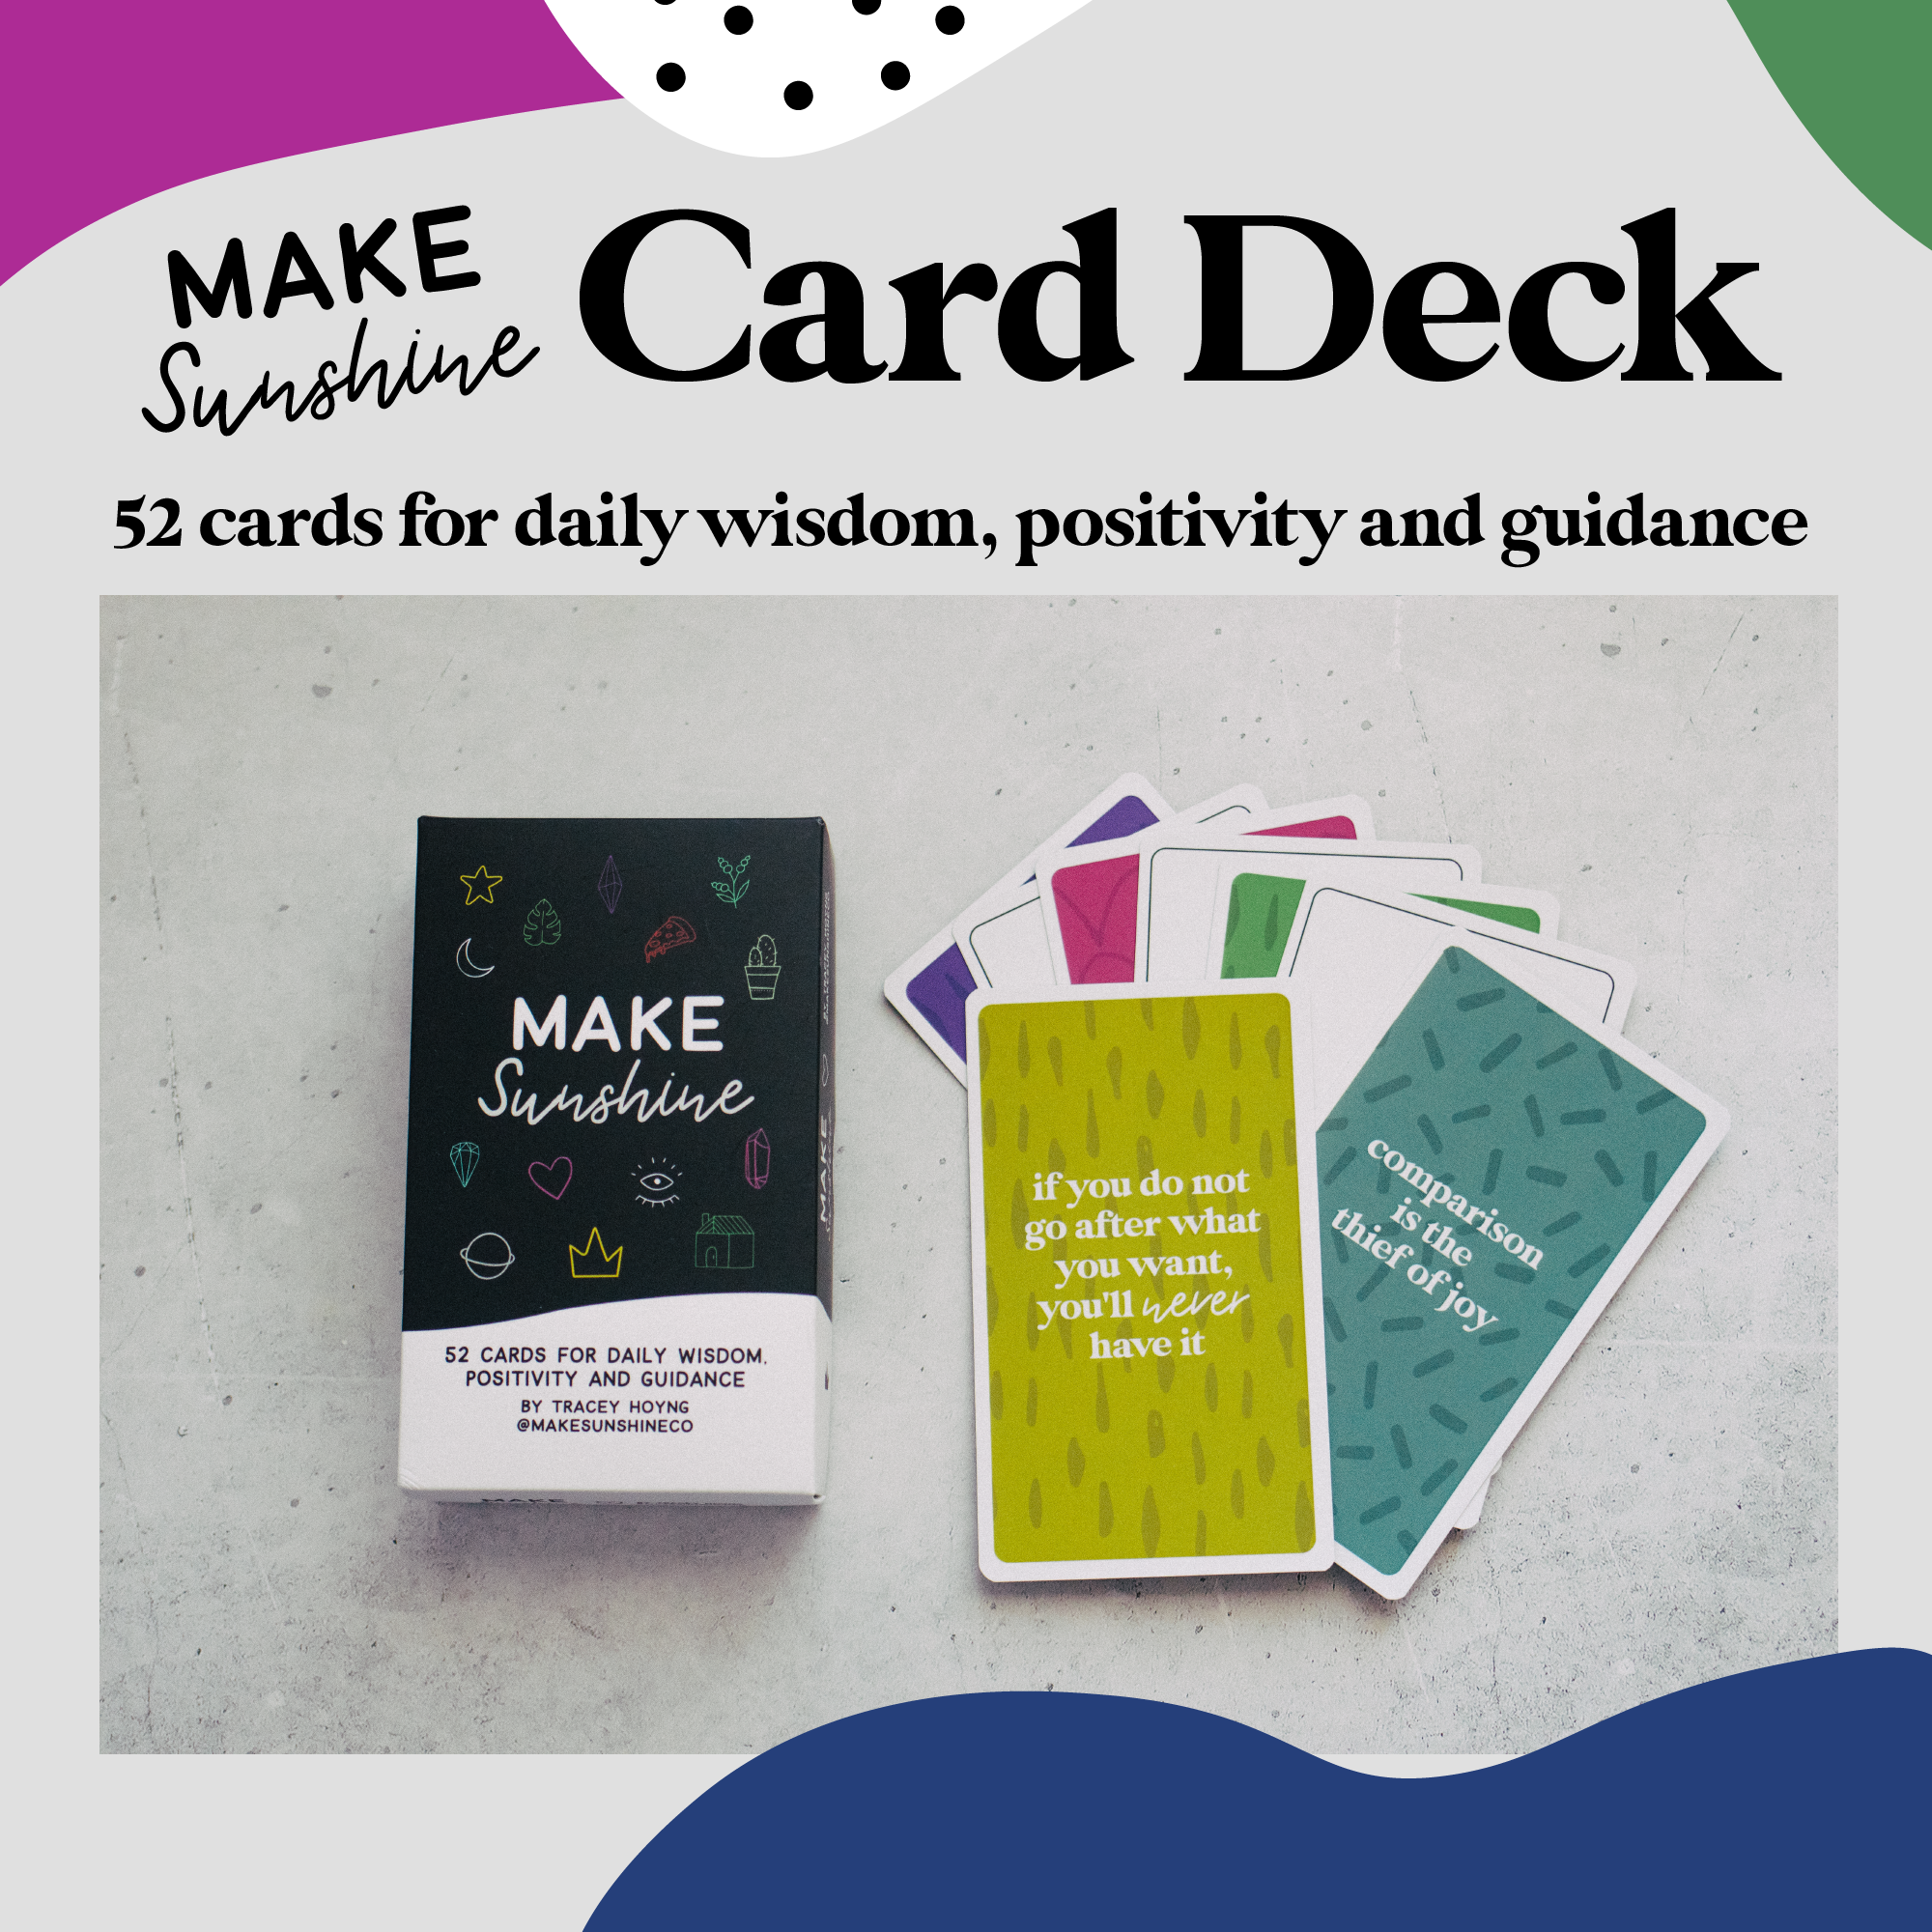 The Make Sunshine Card Deck is here!